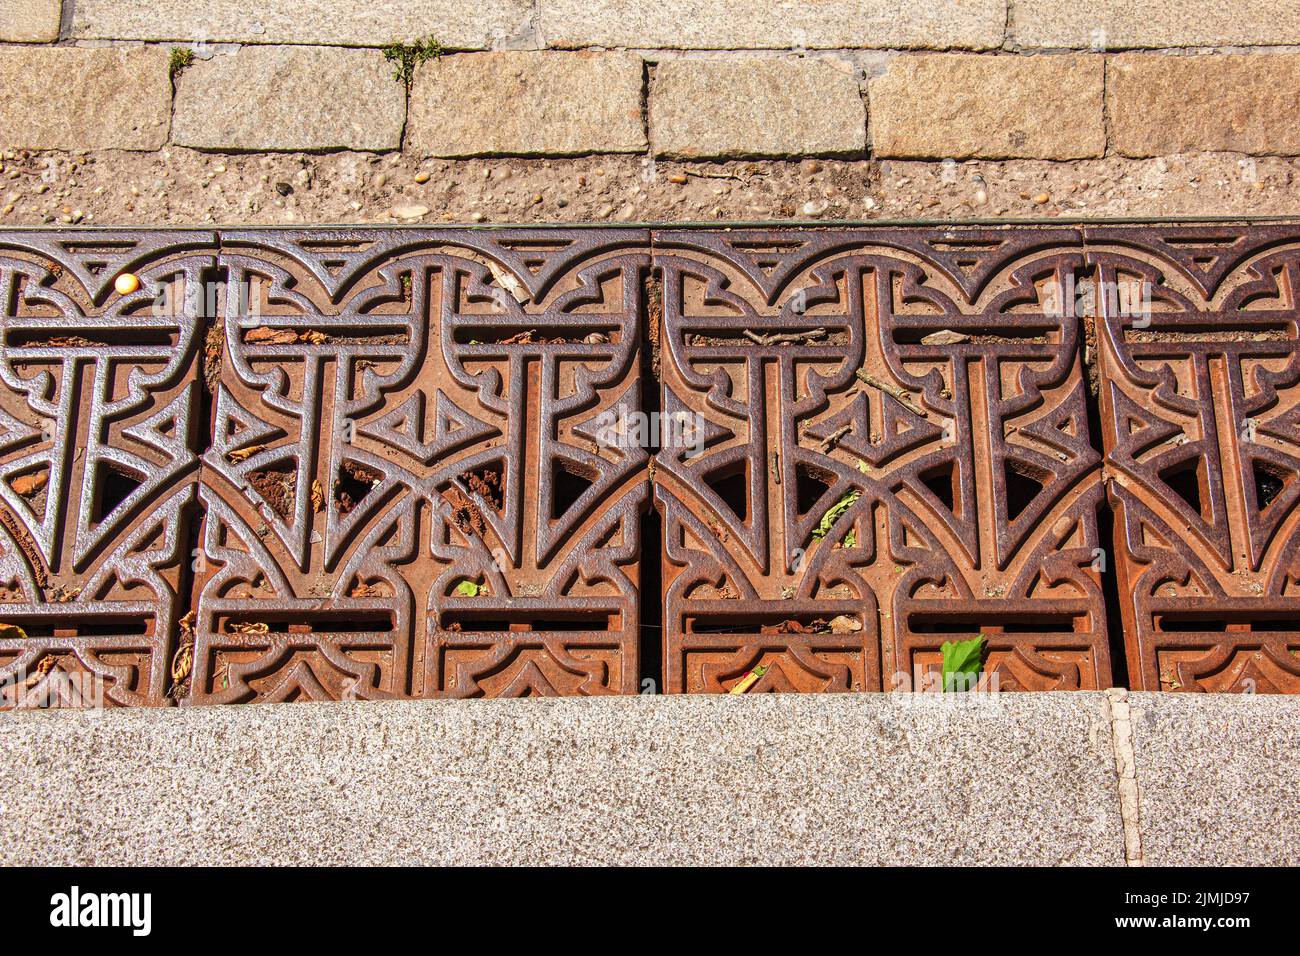 Close-up iron grate drainage system for draining rainwater in Slovakia. Stock Photo